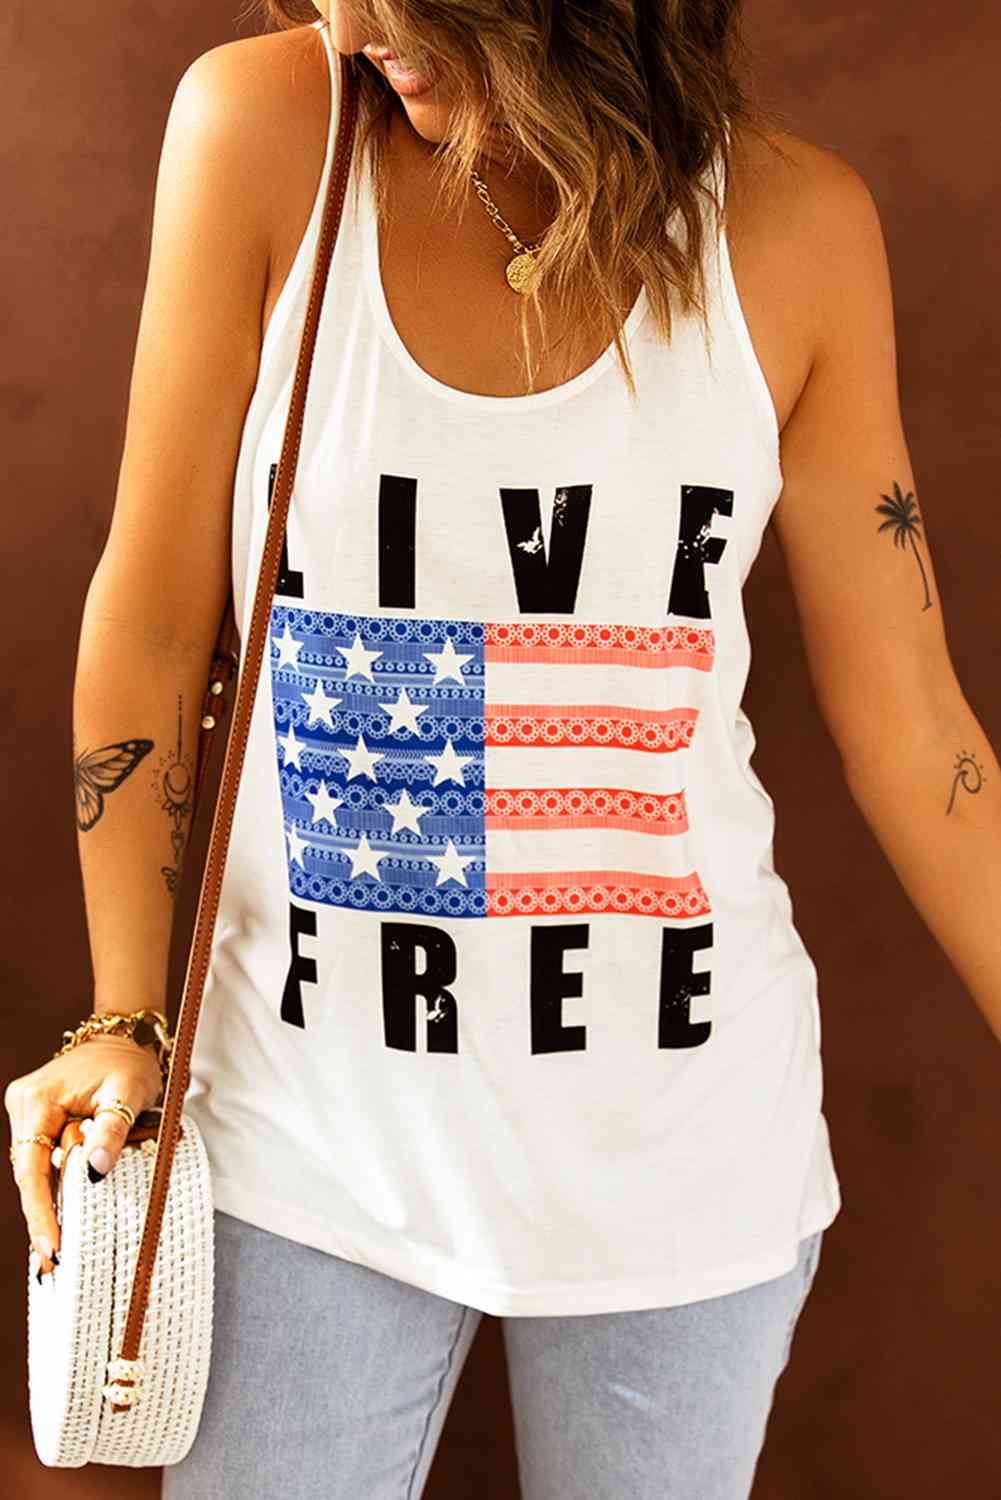 LIVE FREE Stars and Stripes Graphic Tank Print on any thing USA/STOD clothes